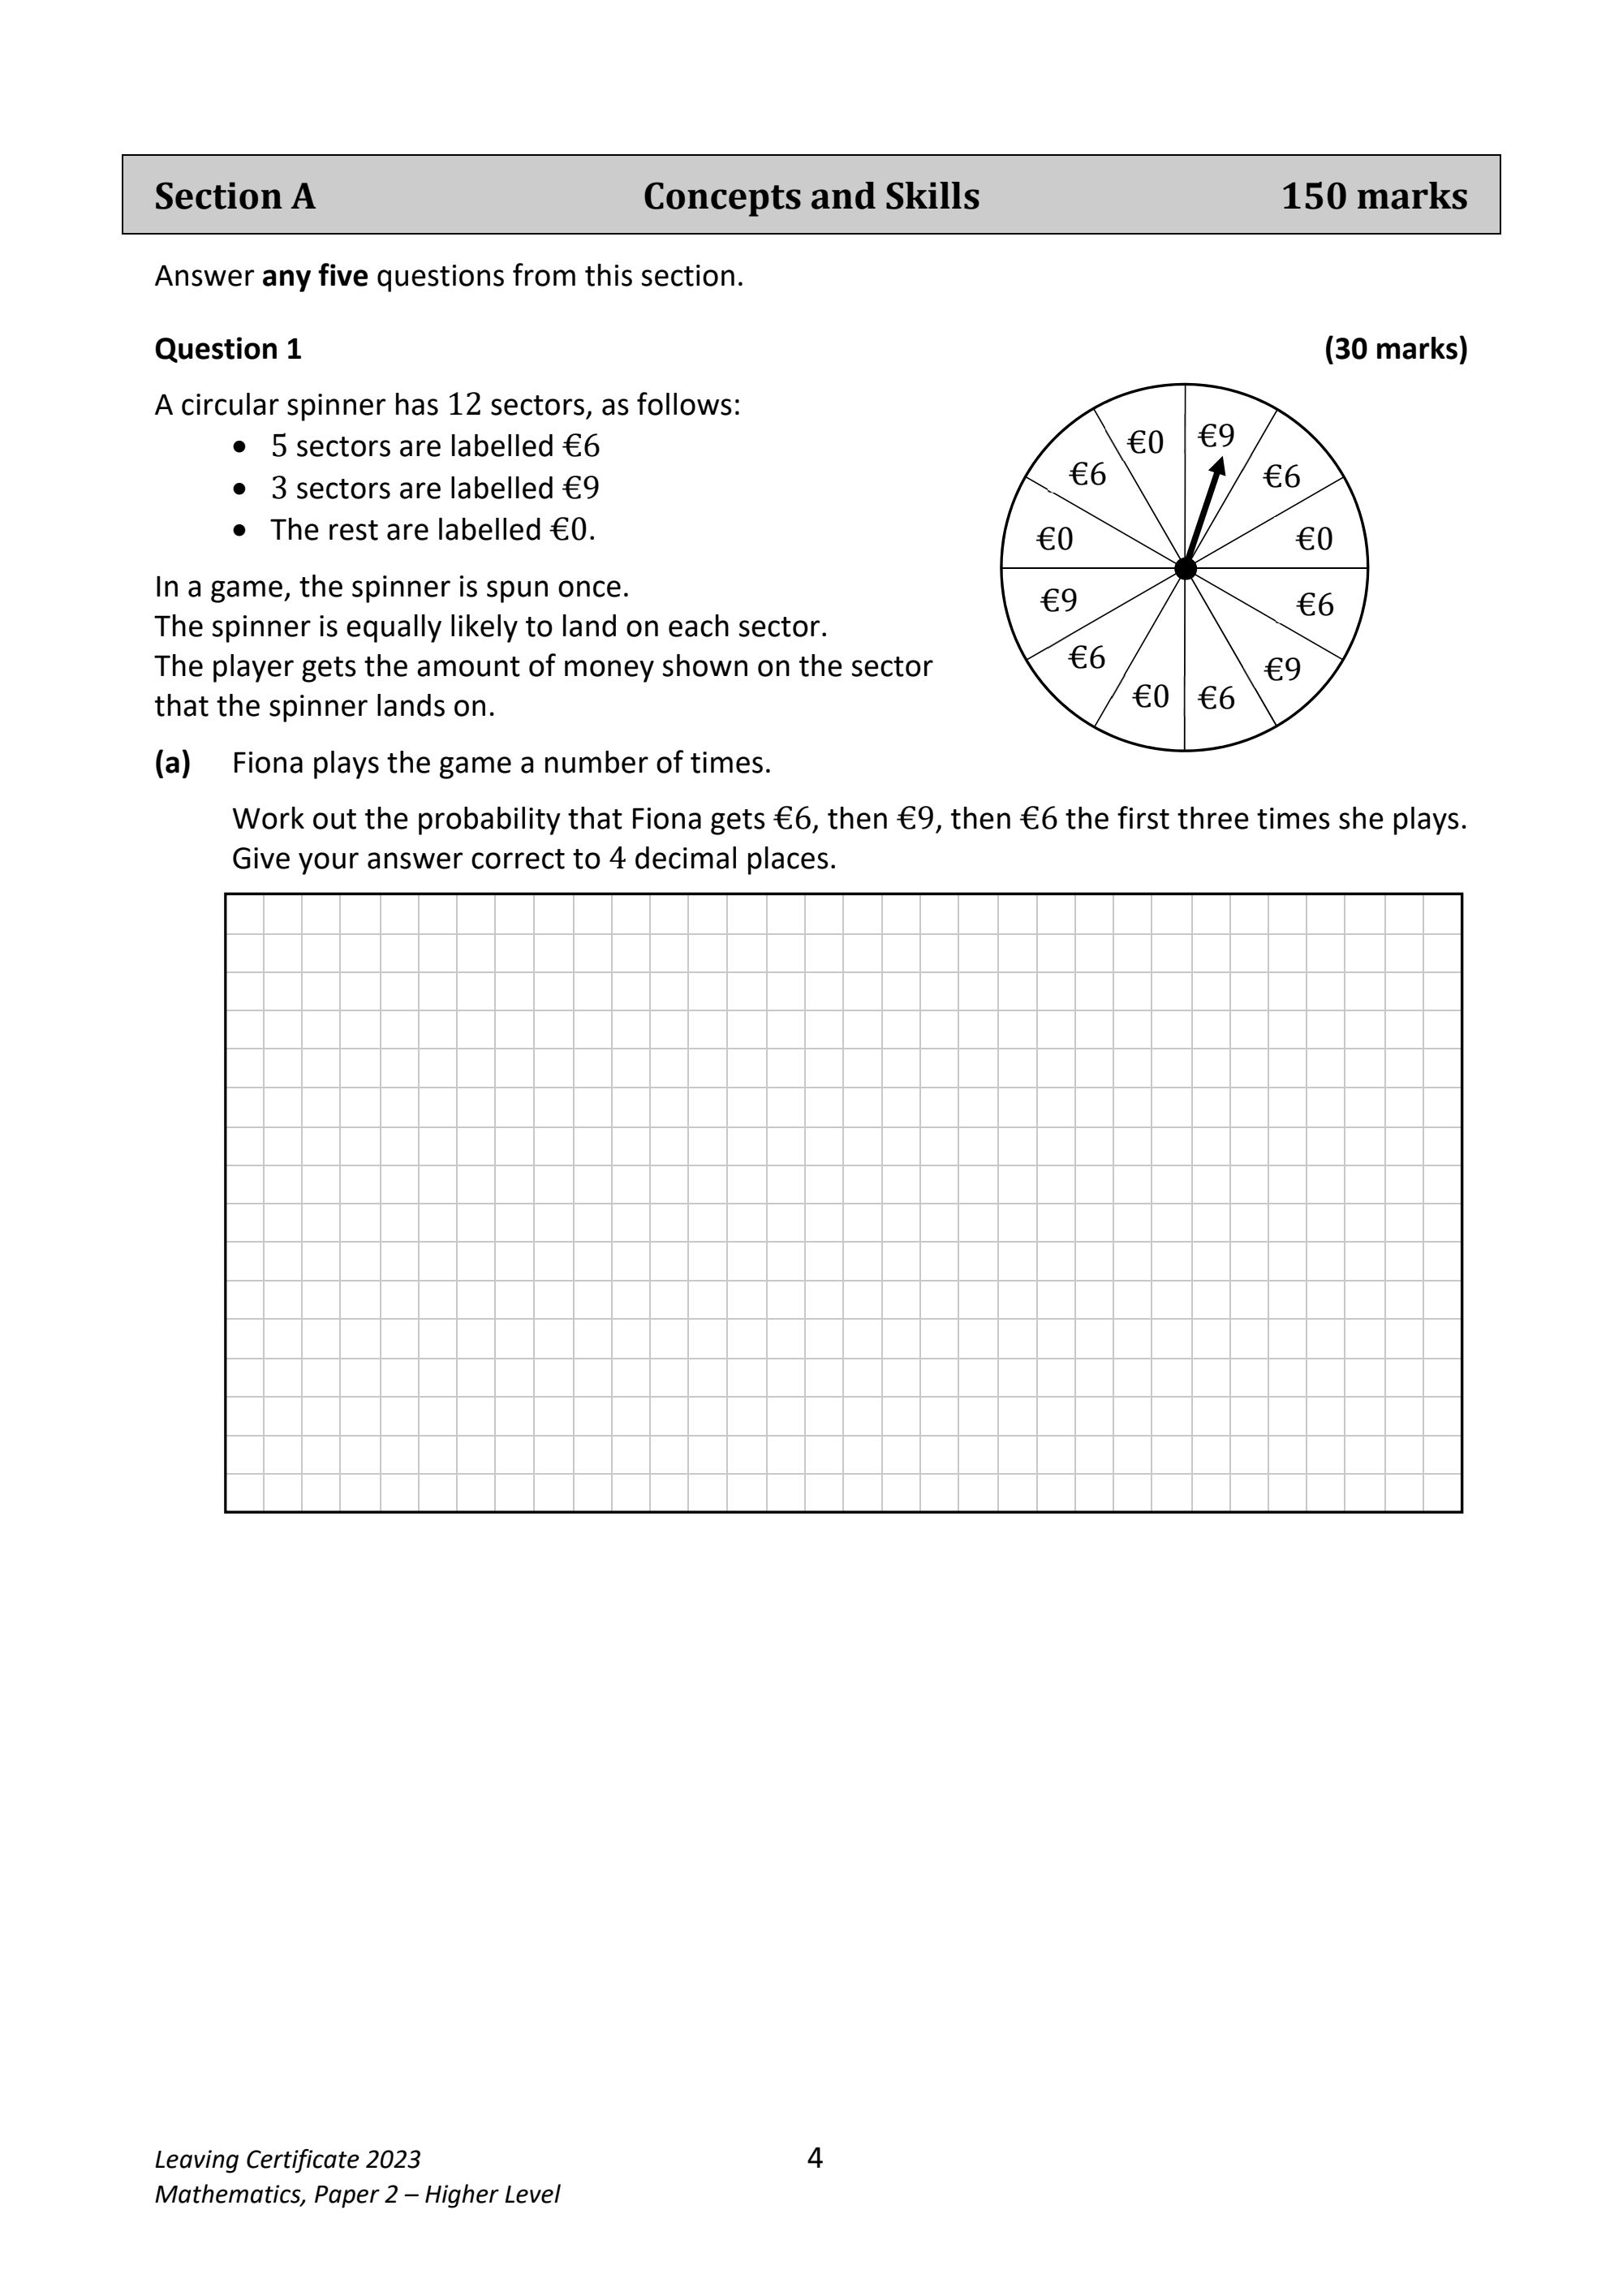 Page 4 of maths paper 2 - higher level